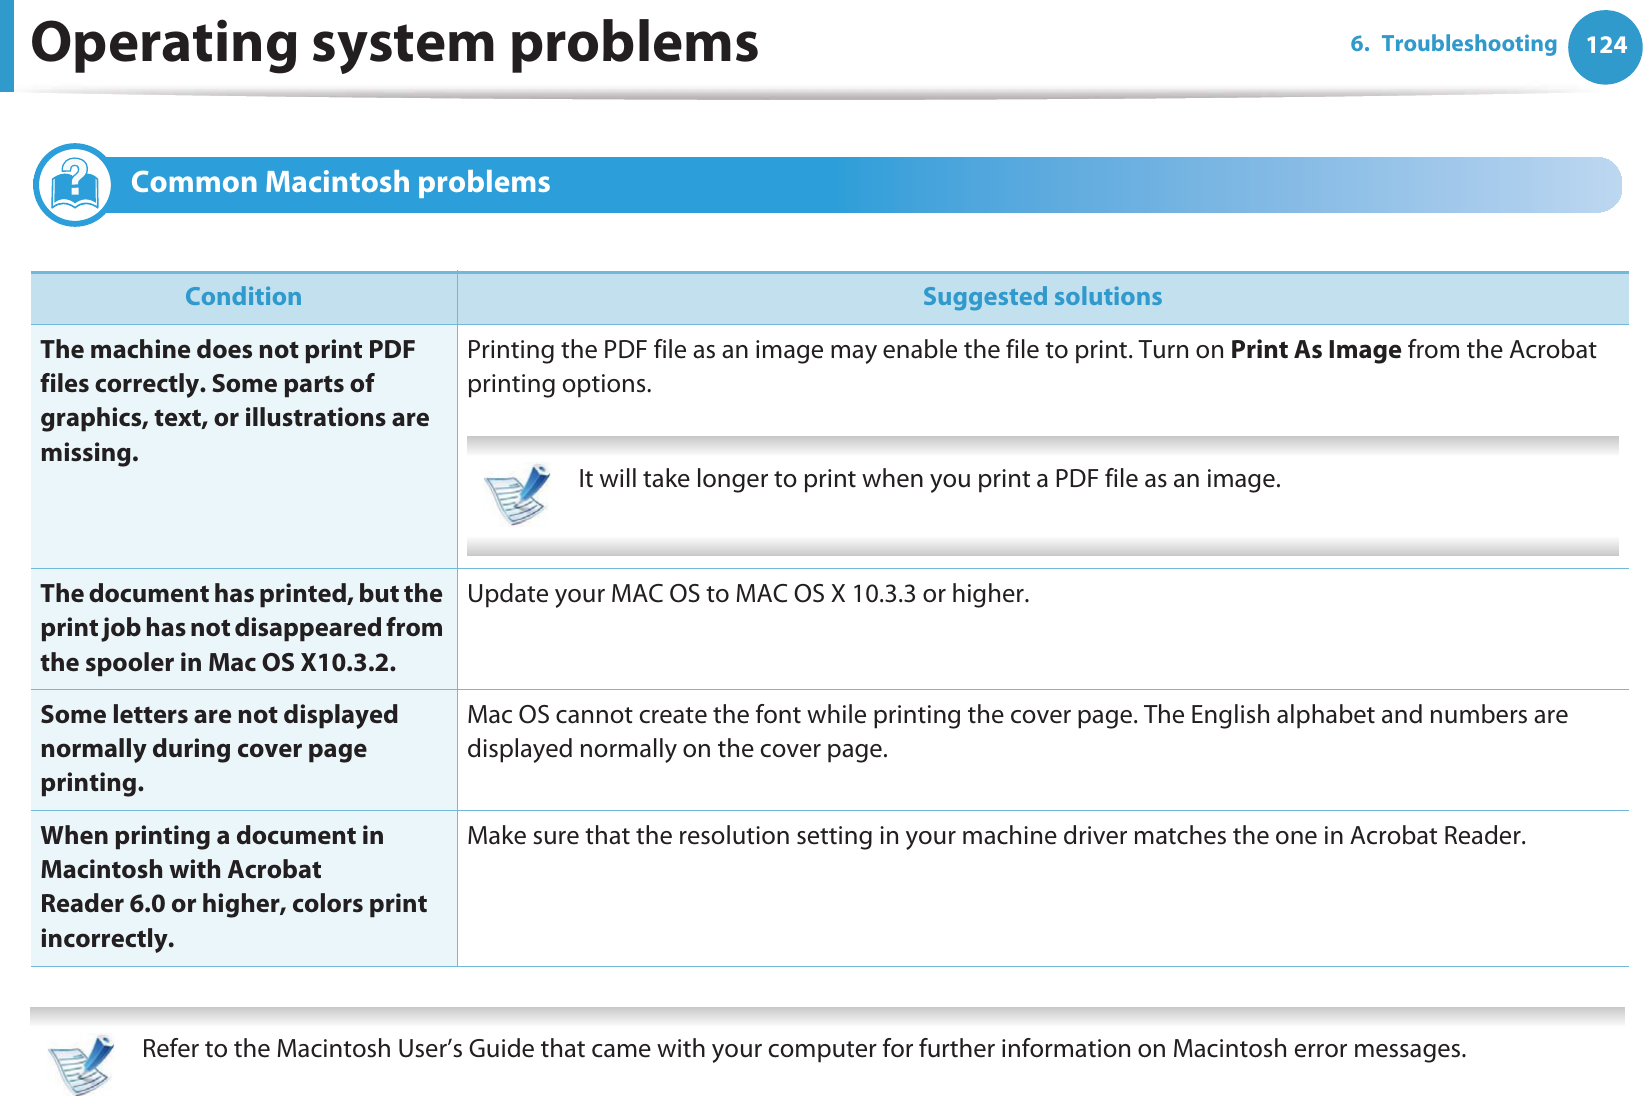 Operating system problems 1246. Troubleshooting2 Common Macintosh problems   Refer to the Macintosh User’s Guide that came with your computer for further information on Macintosh error messages. Condition Suggested solutionsThe machine does not print PDF files correctly. Some parts of graphics, text, or illustrations are missing.Printing the PDF file as an image may enable the file to print. Turn on Print As Image from the Acrobat printing options.  It will take longer to print when you print a PDF file as an image. The document has printed, but the print job has not disappeared from the spooler in Mac OS X10.3.2.Update your MAC OS to MAC OS X 10.3.3 or higher.Some letters are not displayed normally during cover page printing.Mac OS cannot create the font while printing the cover page. The English alphabet and numbers are displayed normally on the cover page.When printing a document in Macintosh with Acrobat Reader 6.0 or higher, colors print incorrectly.Make sure that the resolution setting in your machine driver matches the one in Acrobat Reader.